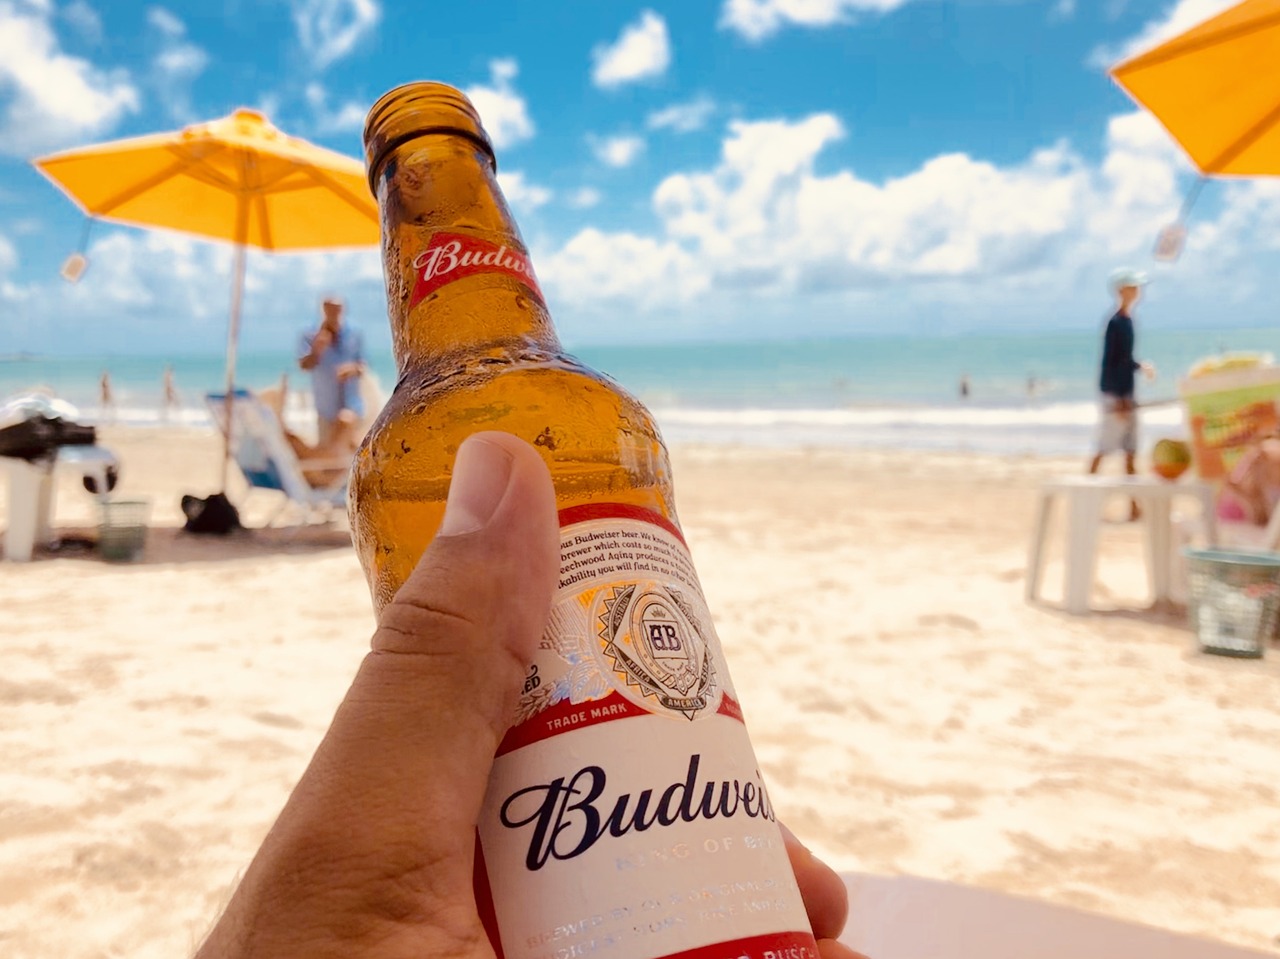 man on the beach holding a glass bottle of Budweiser beer